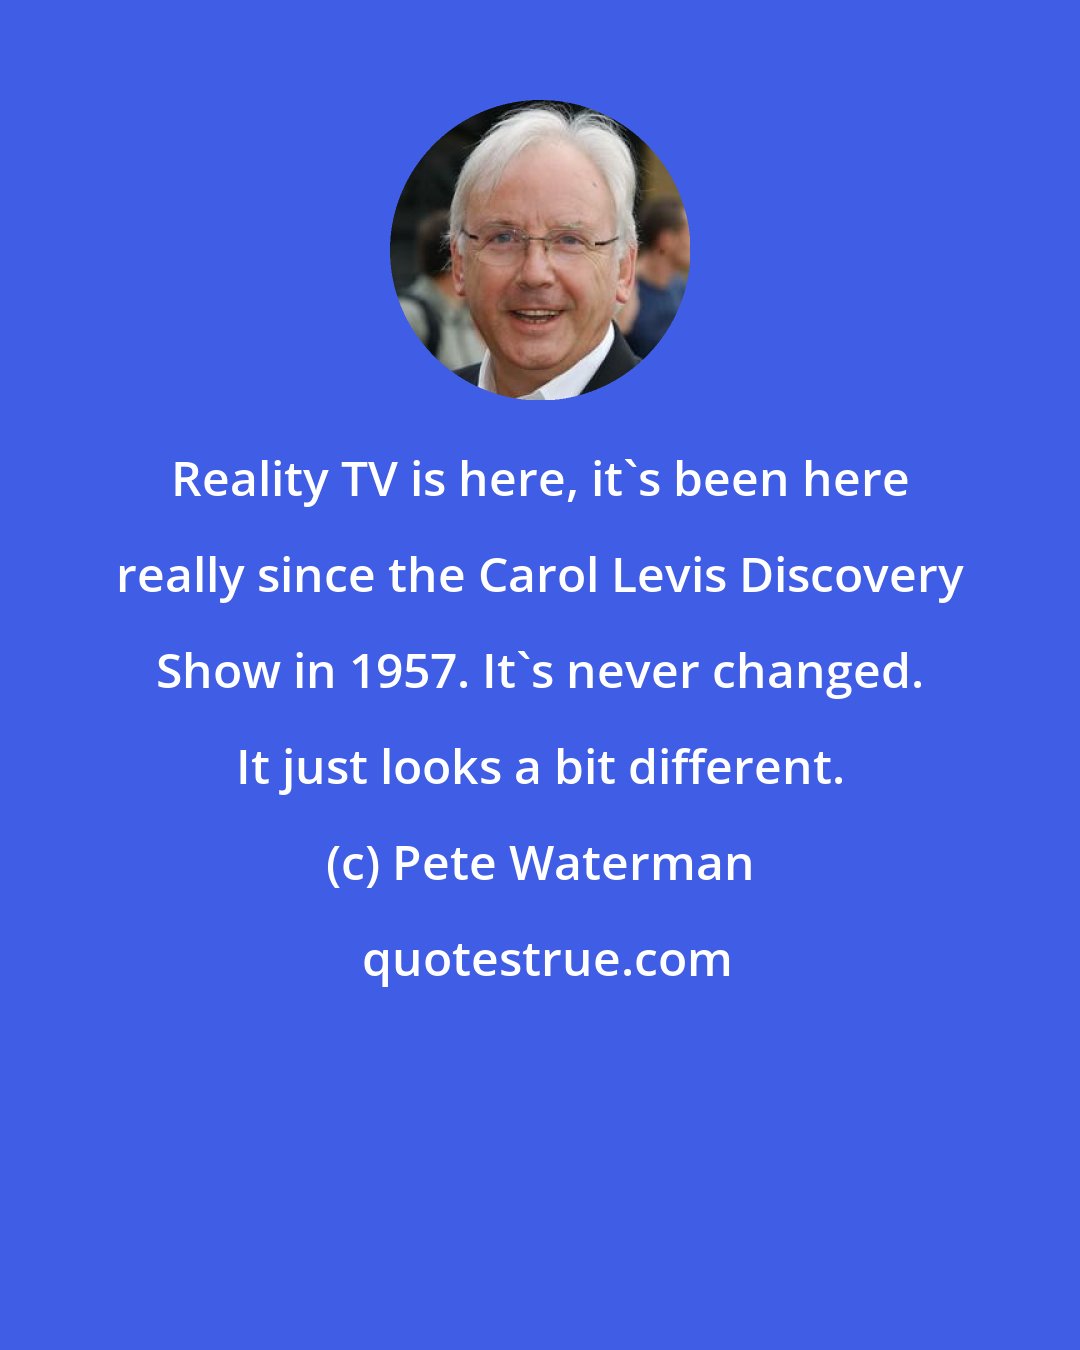 Pete Waterman: Reality TV is here, it's been here really since the Carol Levis Discovery Show in 1957. It's never changed. It just looks a bit different.